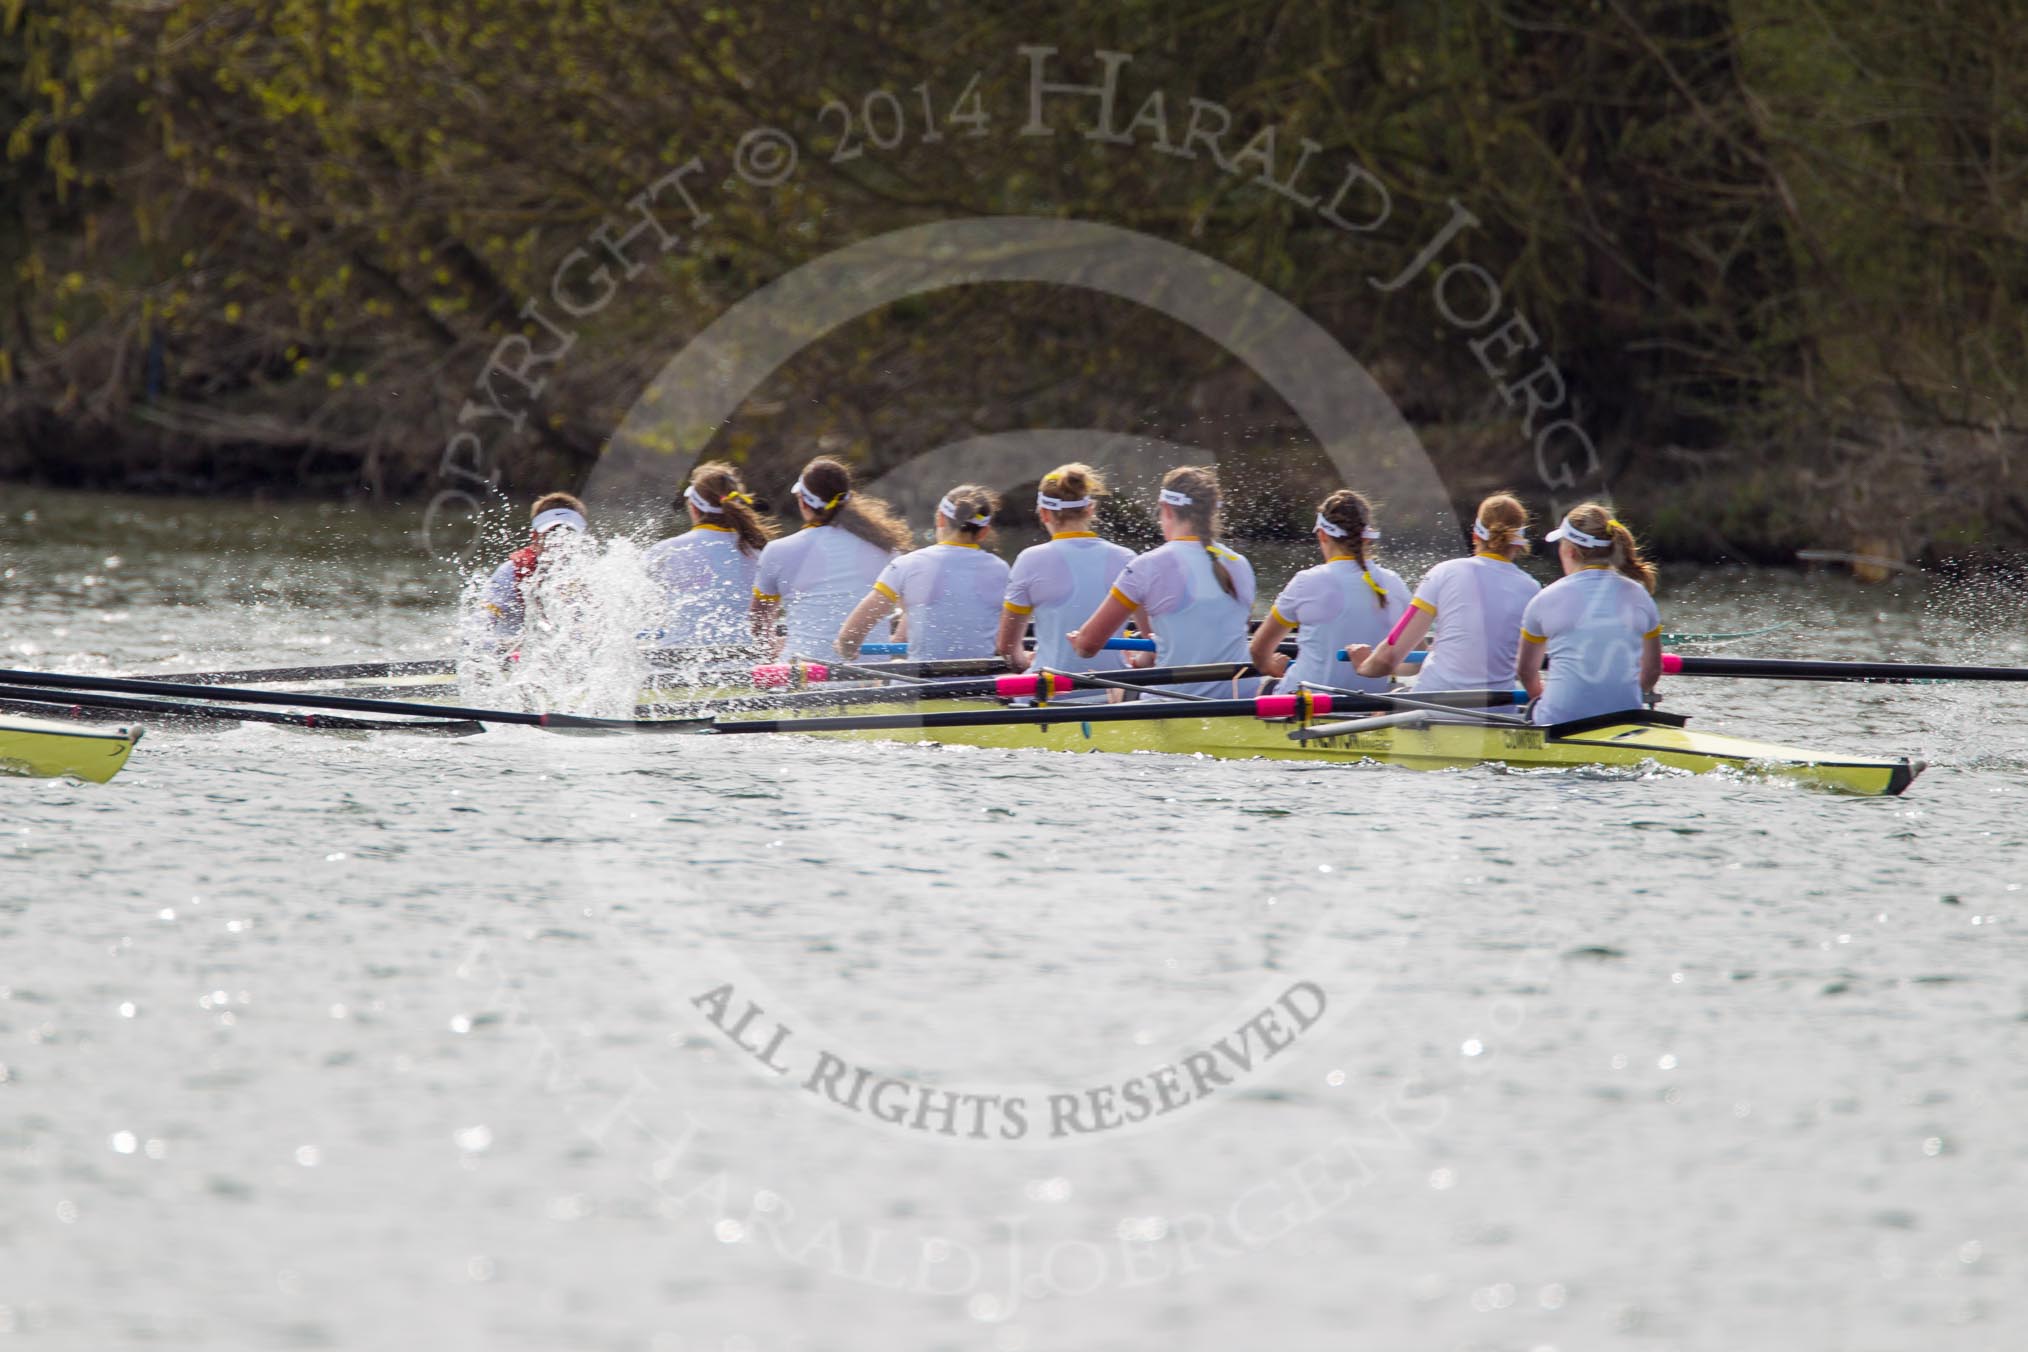 The Women's Boat Race and Henley Boat Races 2014: The Women's Reserves - Osiris v. Blondie race. Osiris (Oxford) on the left,  and Blondie (Cambridge) are quite close together again..
River Thames,
Henley-on-Thames,
Buckinghamshire,
United Kingdom,
on 30 March 2014 at 14:16, image #150